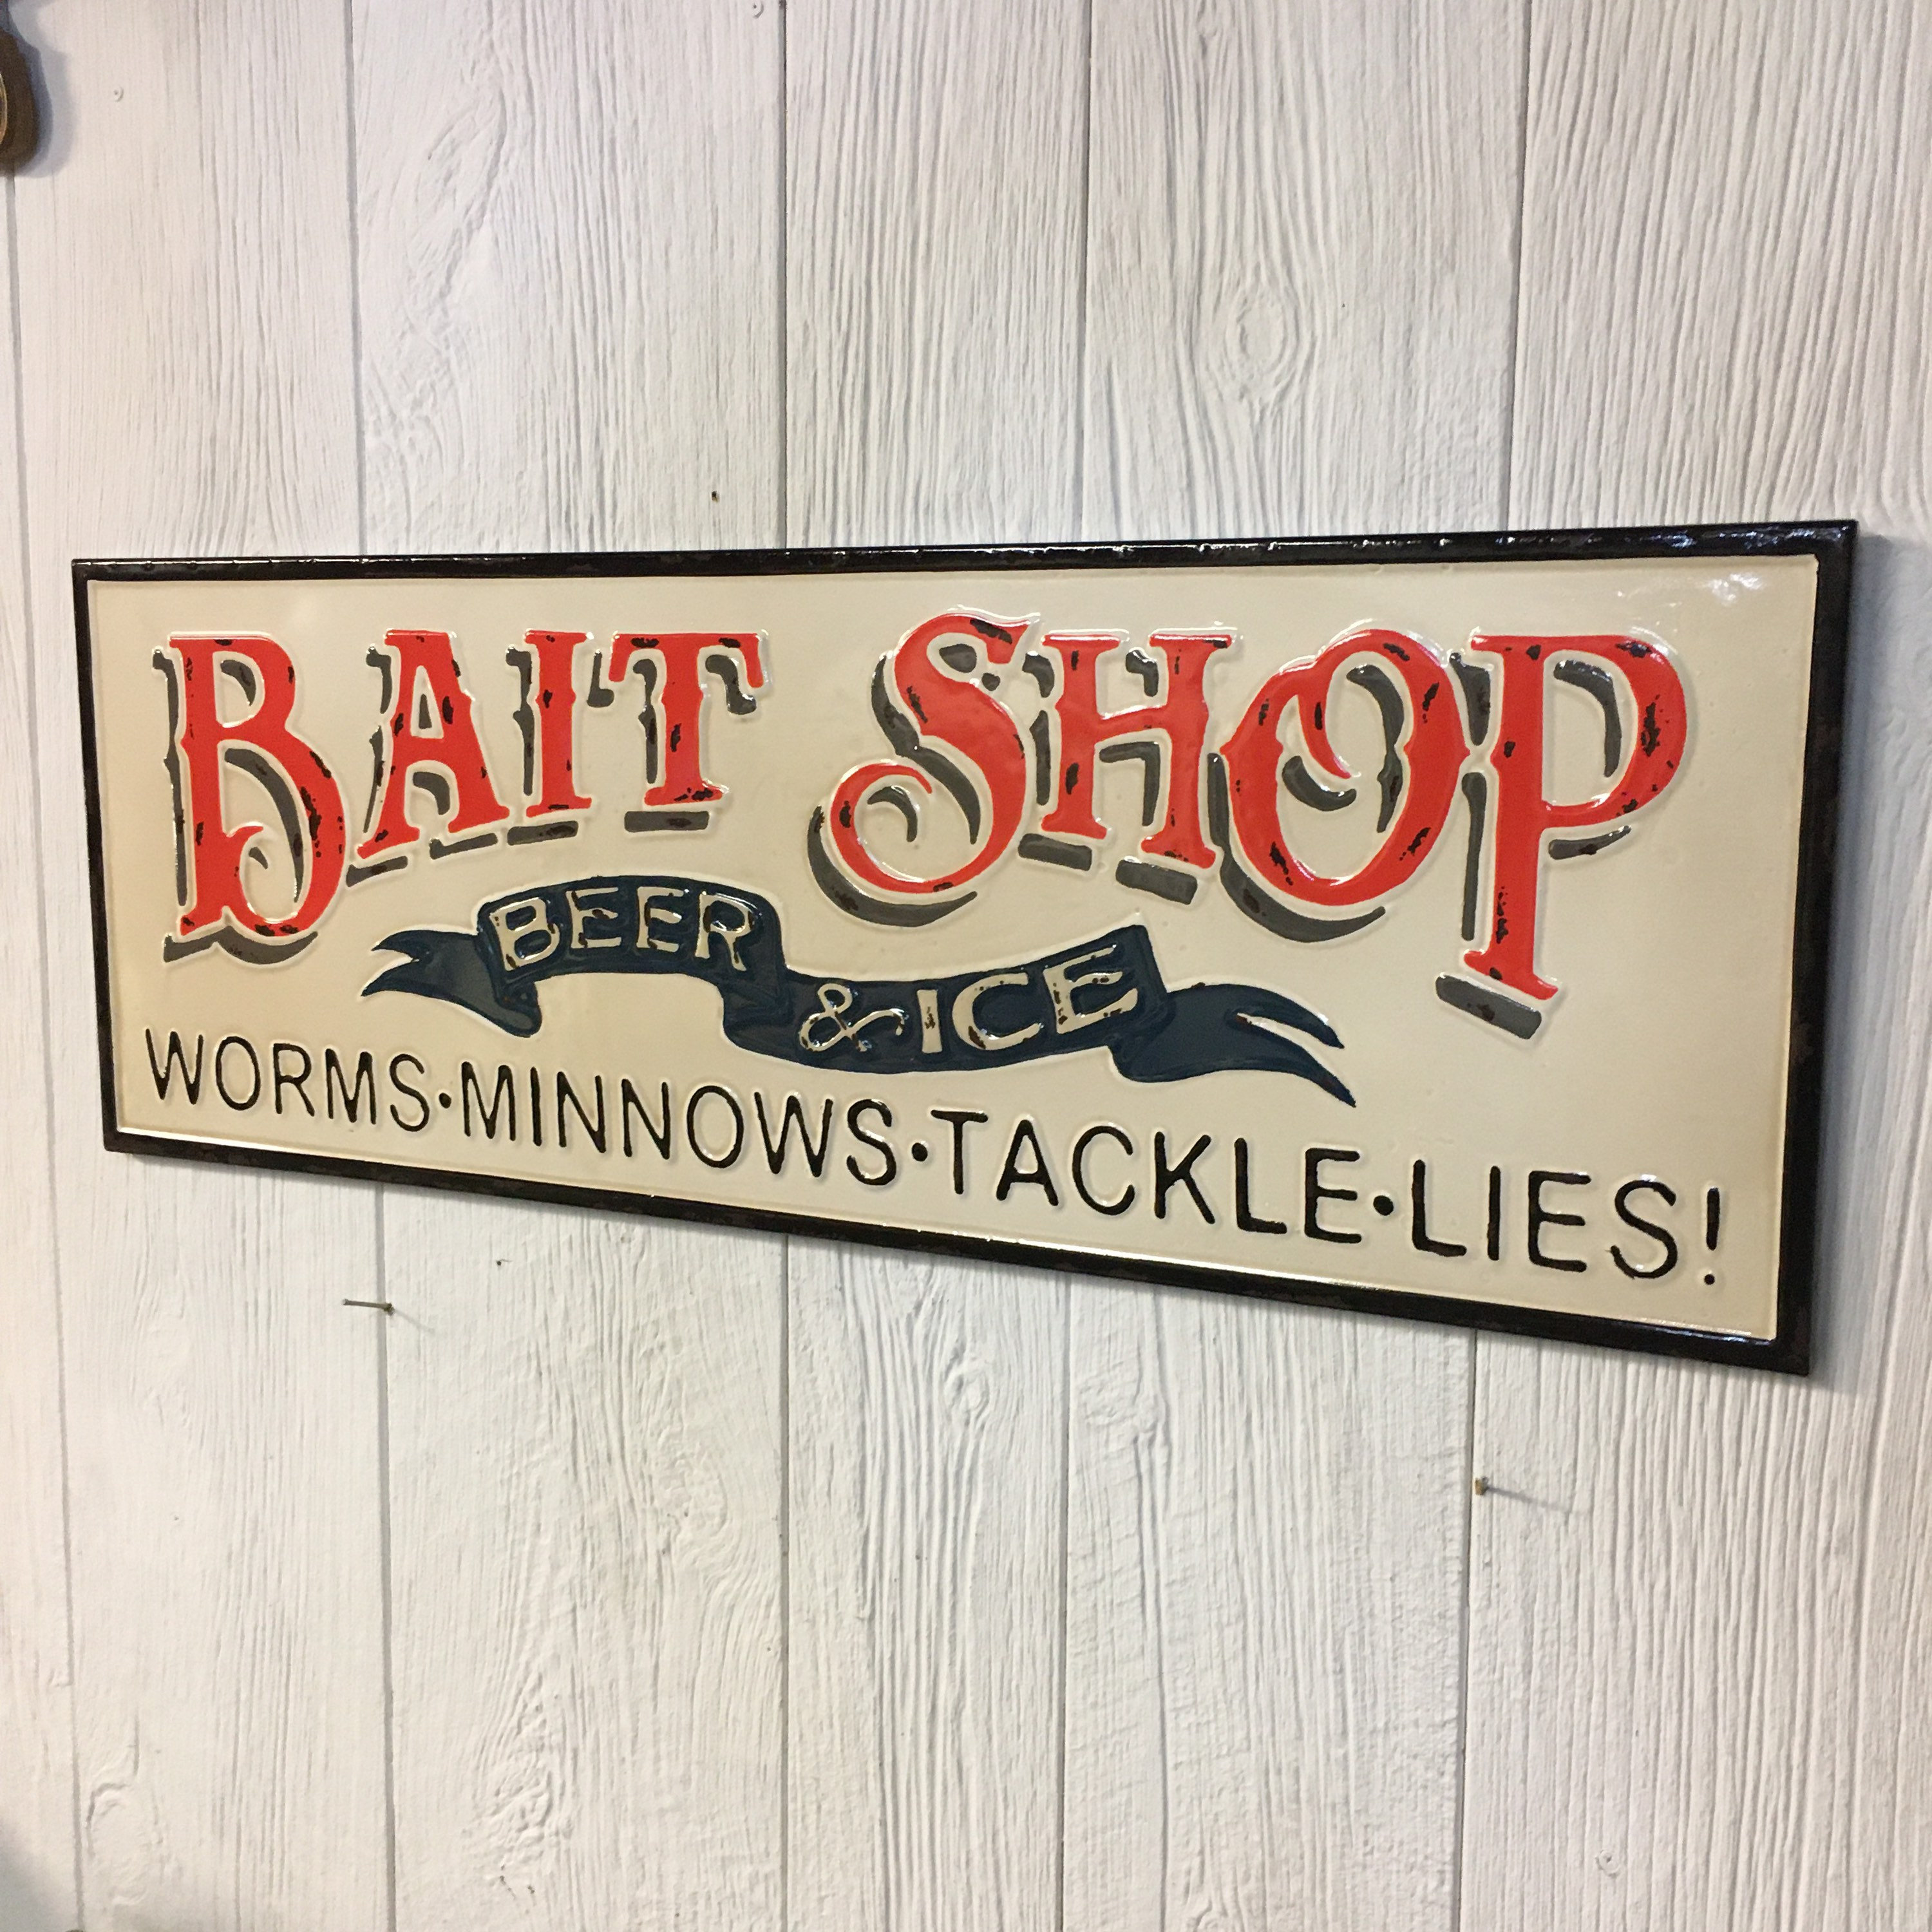 Large Metal Bait Shop Sign Beer Ice Tackle Minnows Rustic Worms